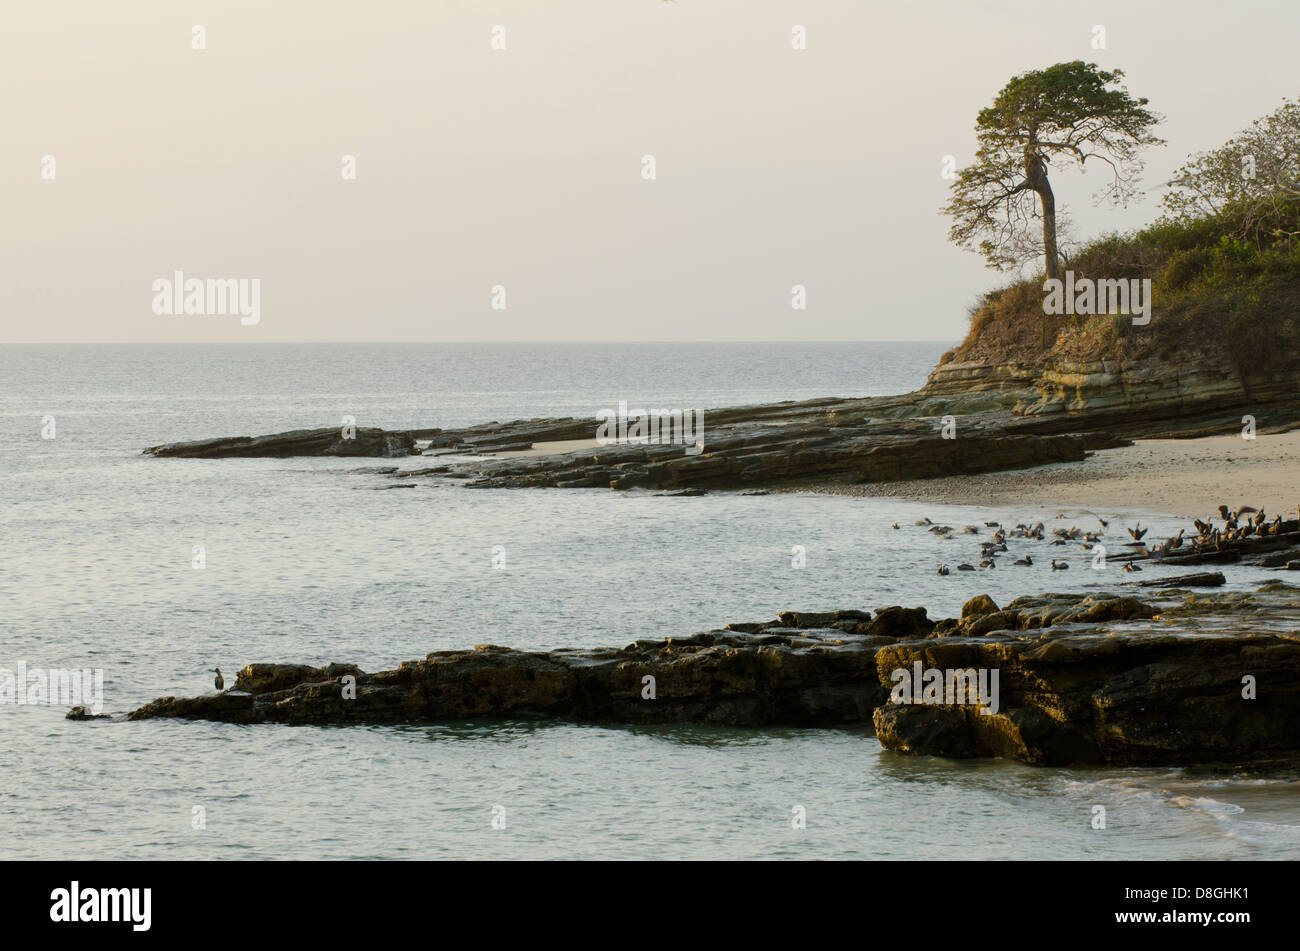 View of rocky sea shore and pelicans at early morning Stock Photo